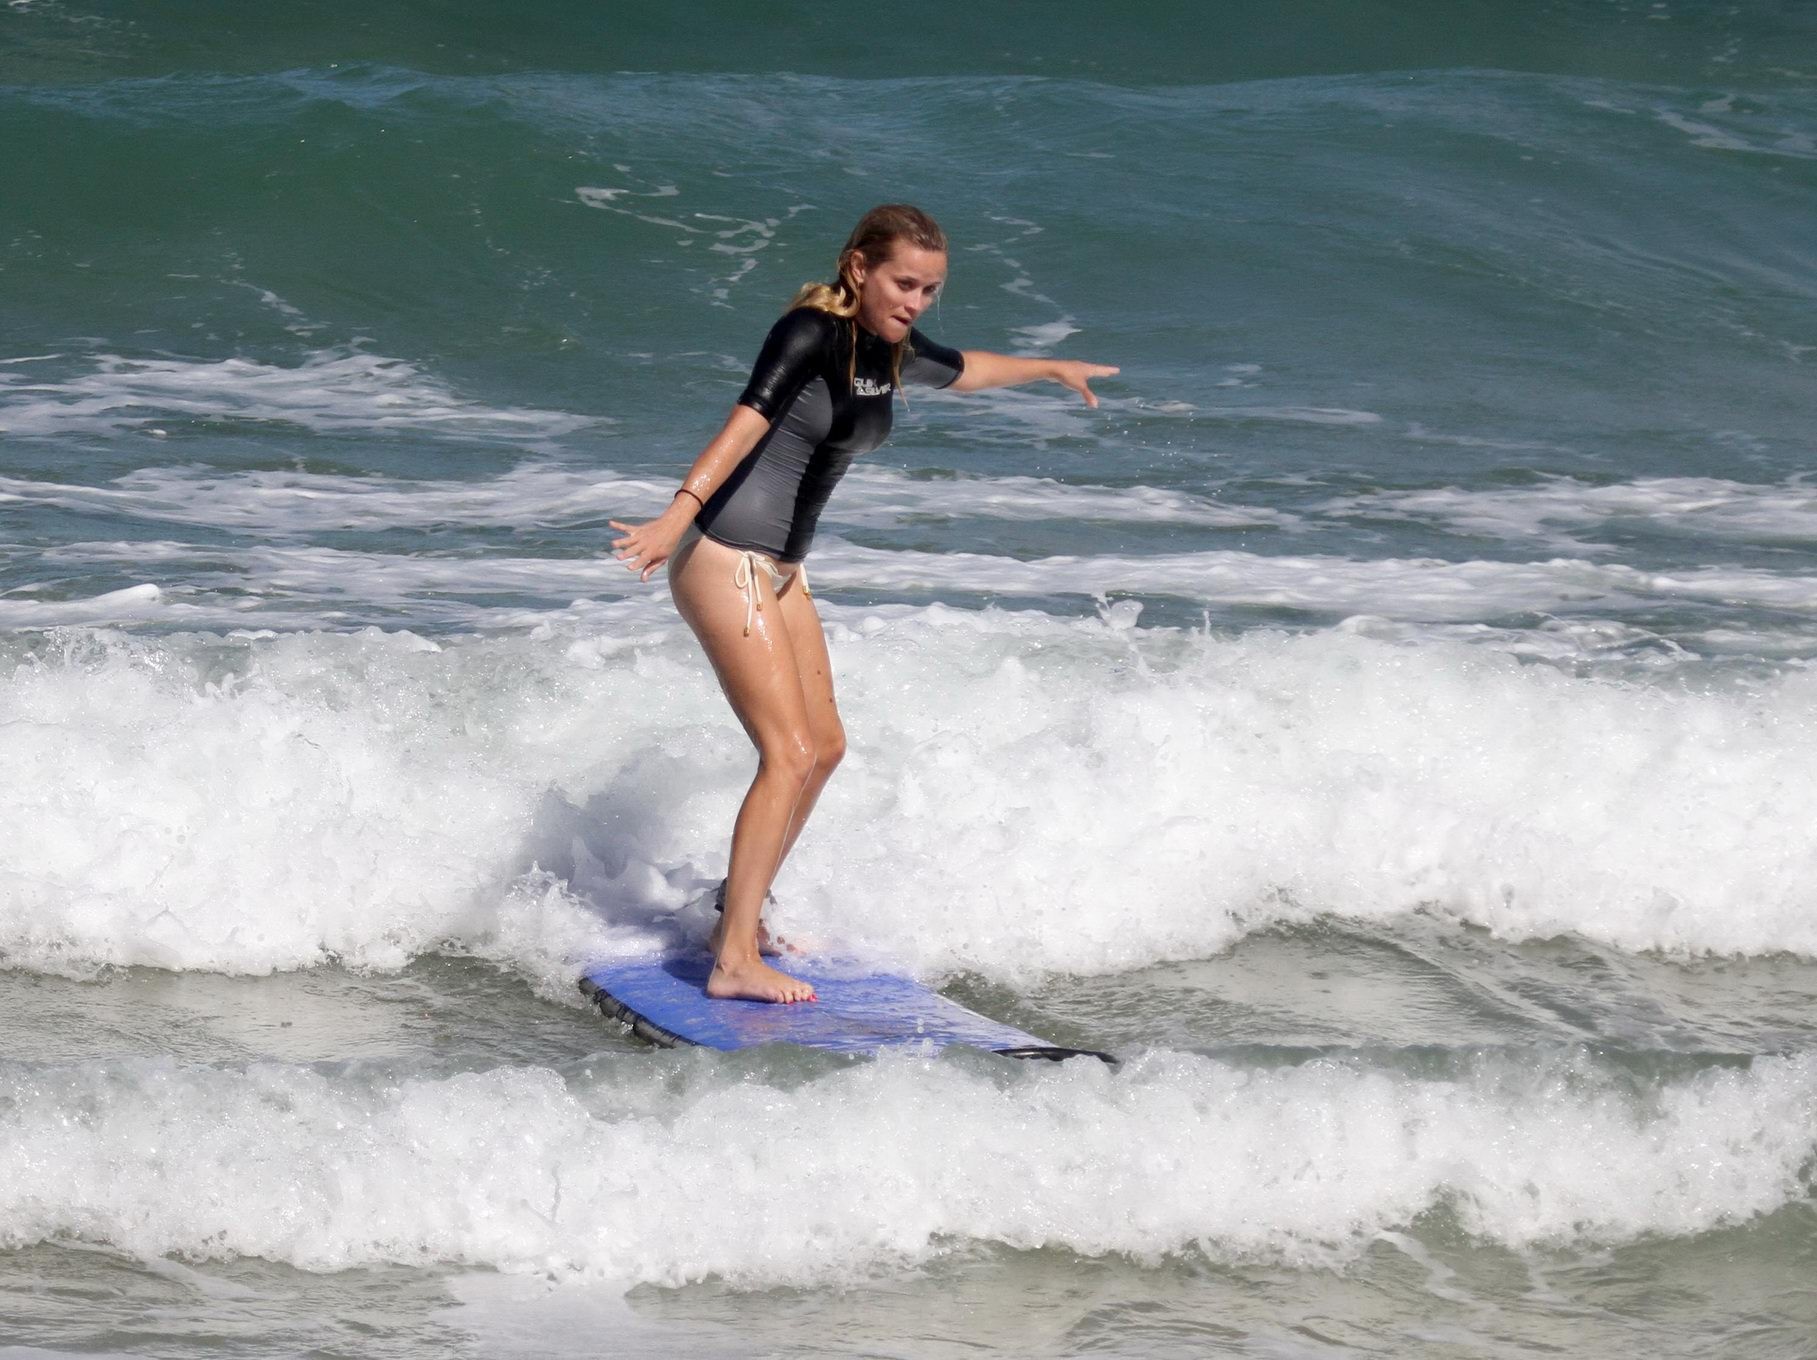 Reese Witherspoon shows off her ass while surfing in Hawaii #75291207